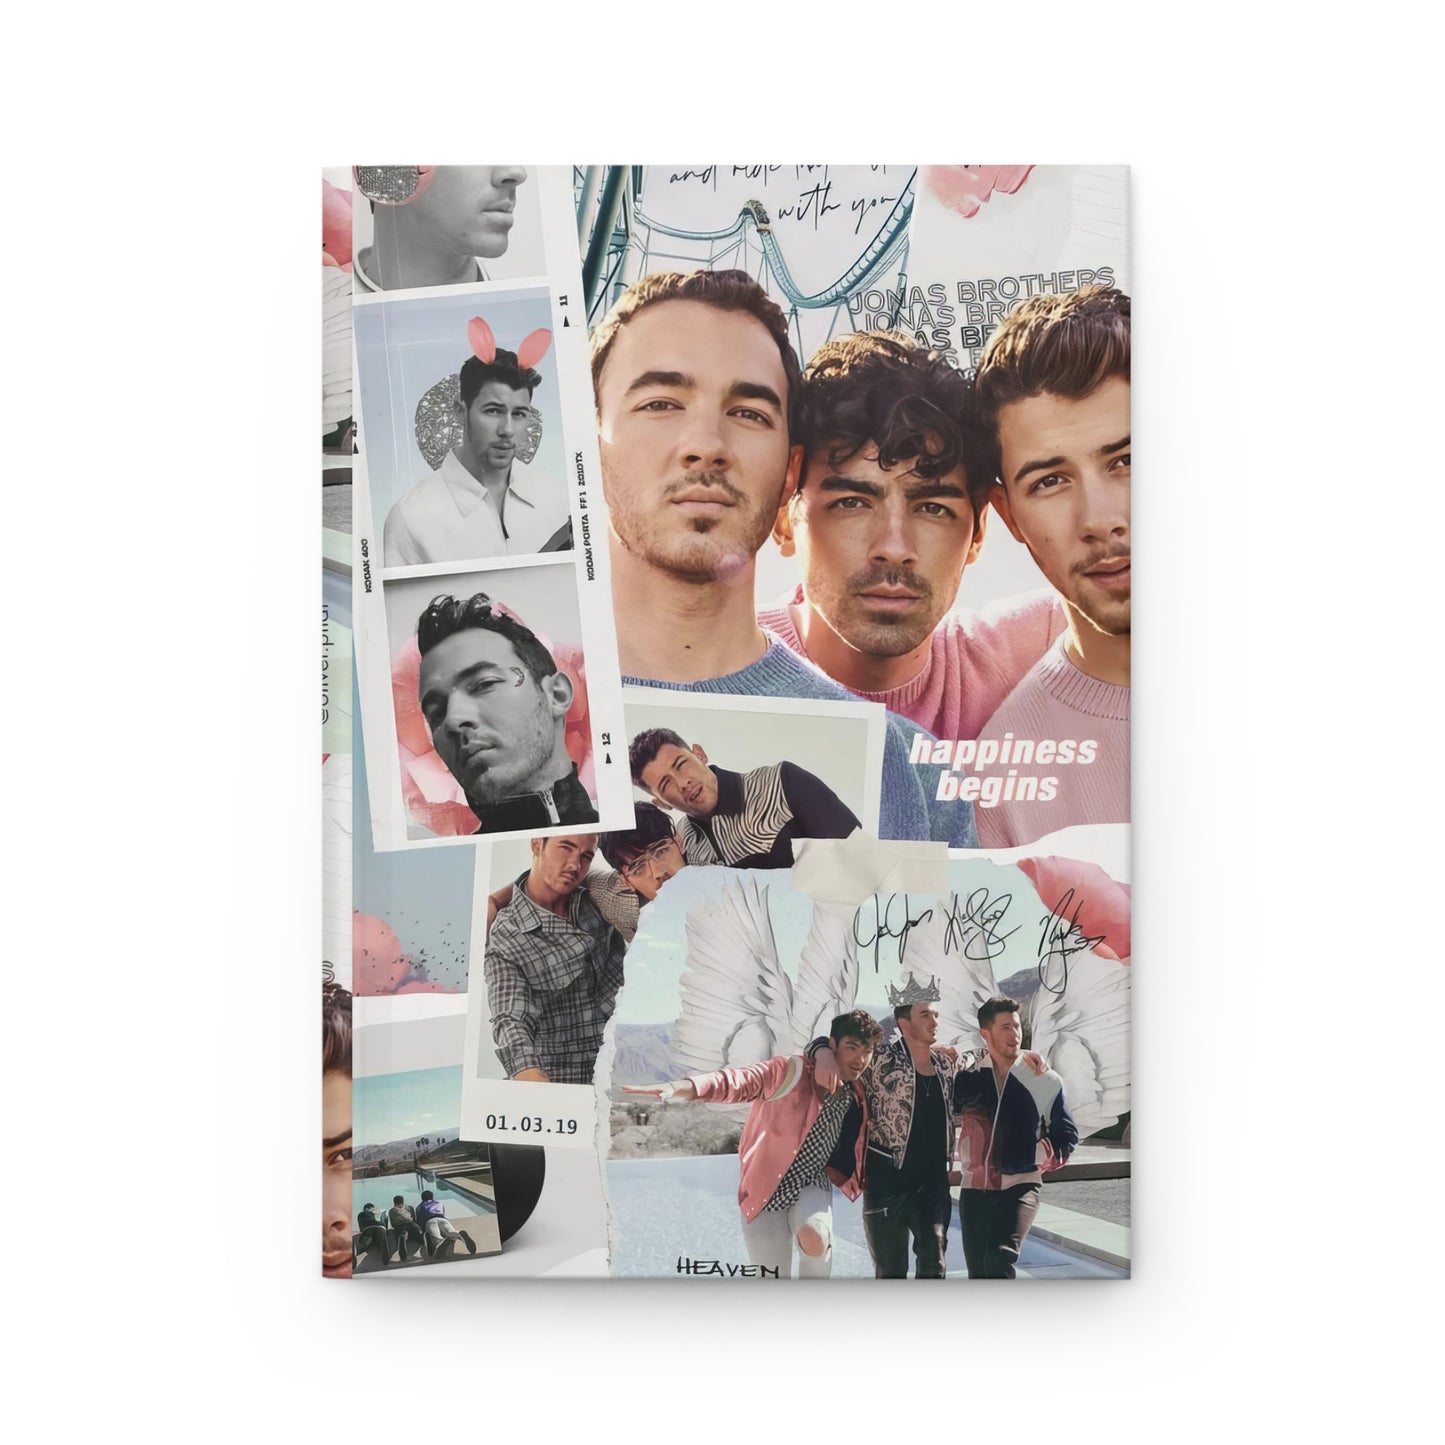 Jonas Brothers Happiness Begins Collage Hardcover Journal